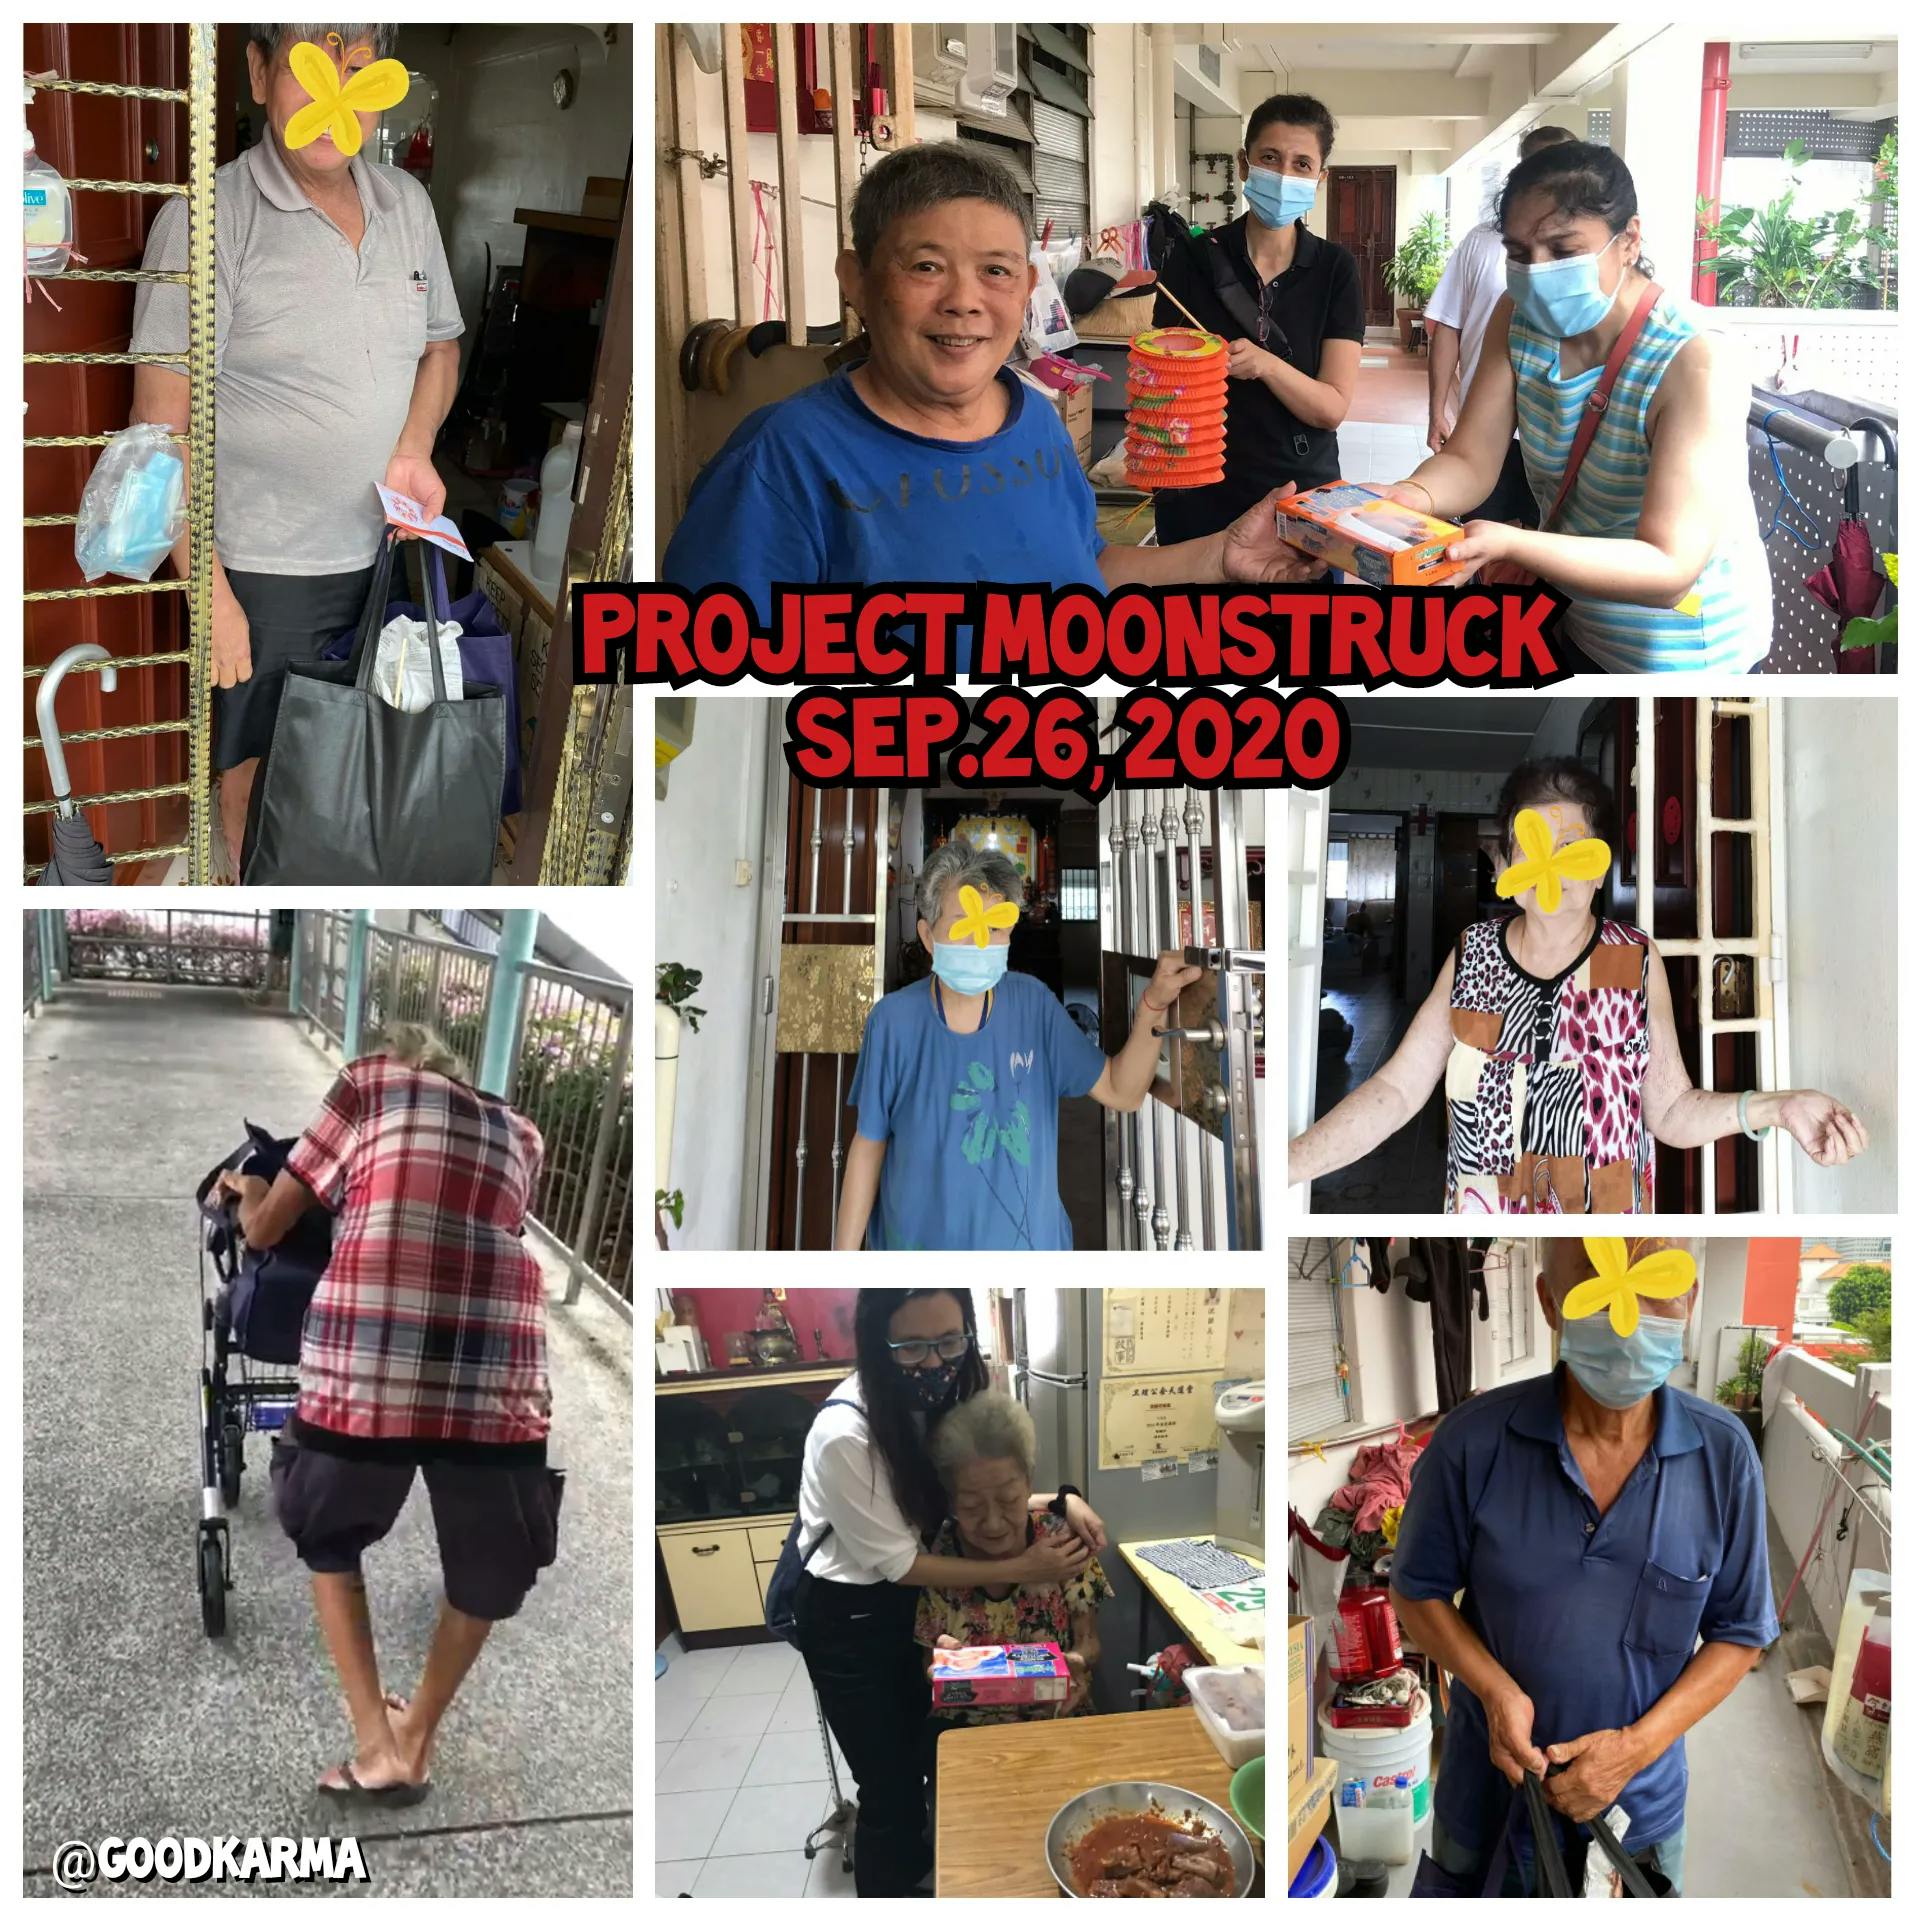 Moonstruck Project Poster